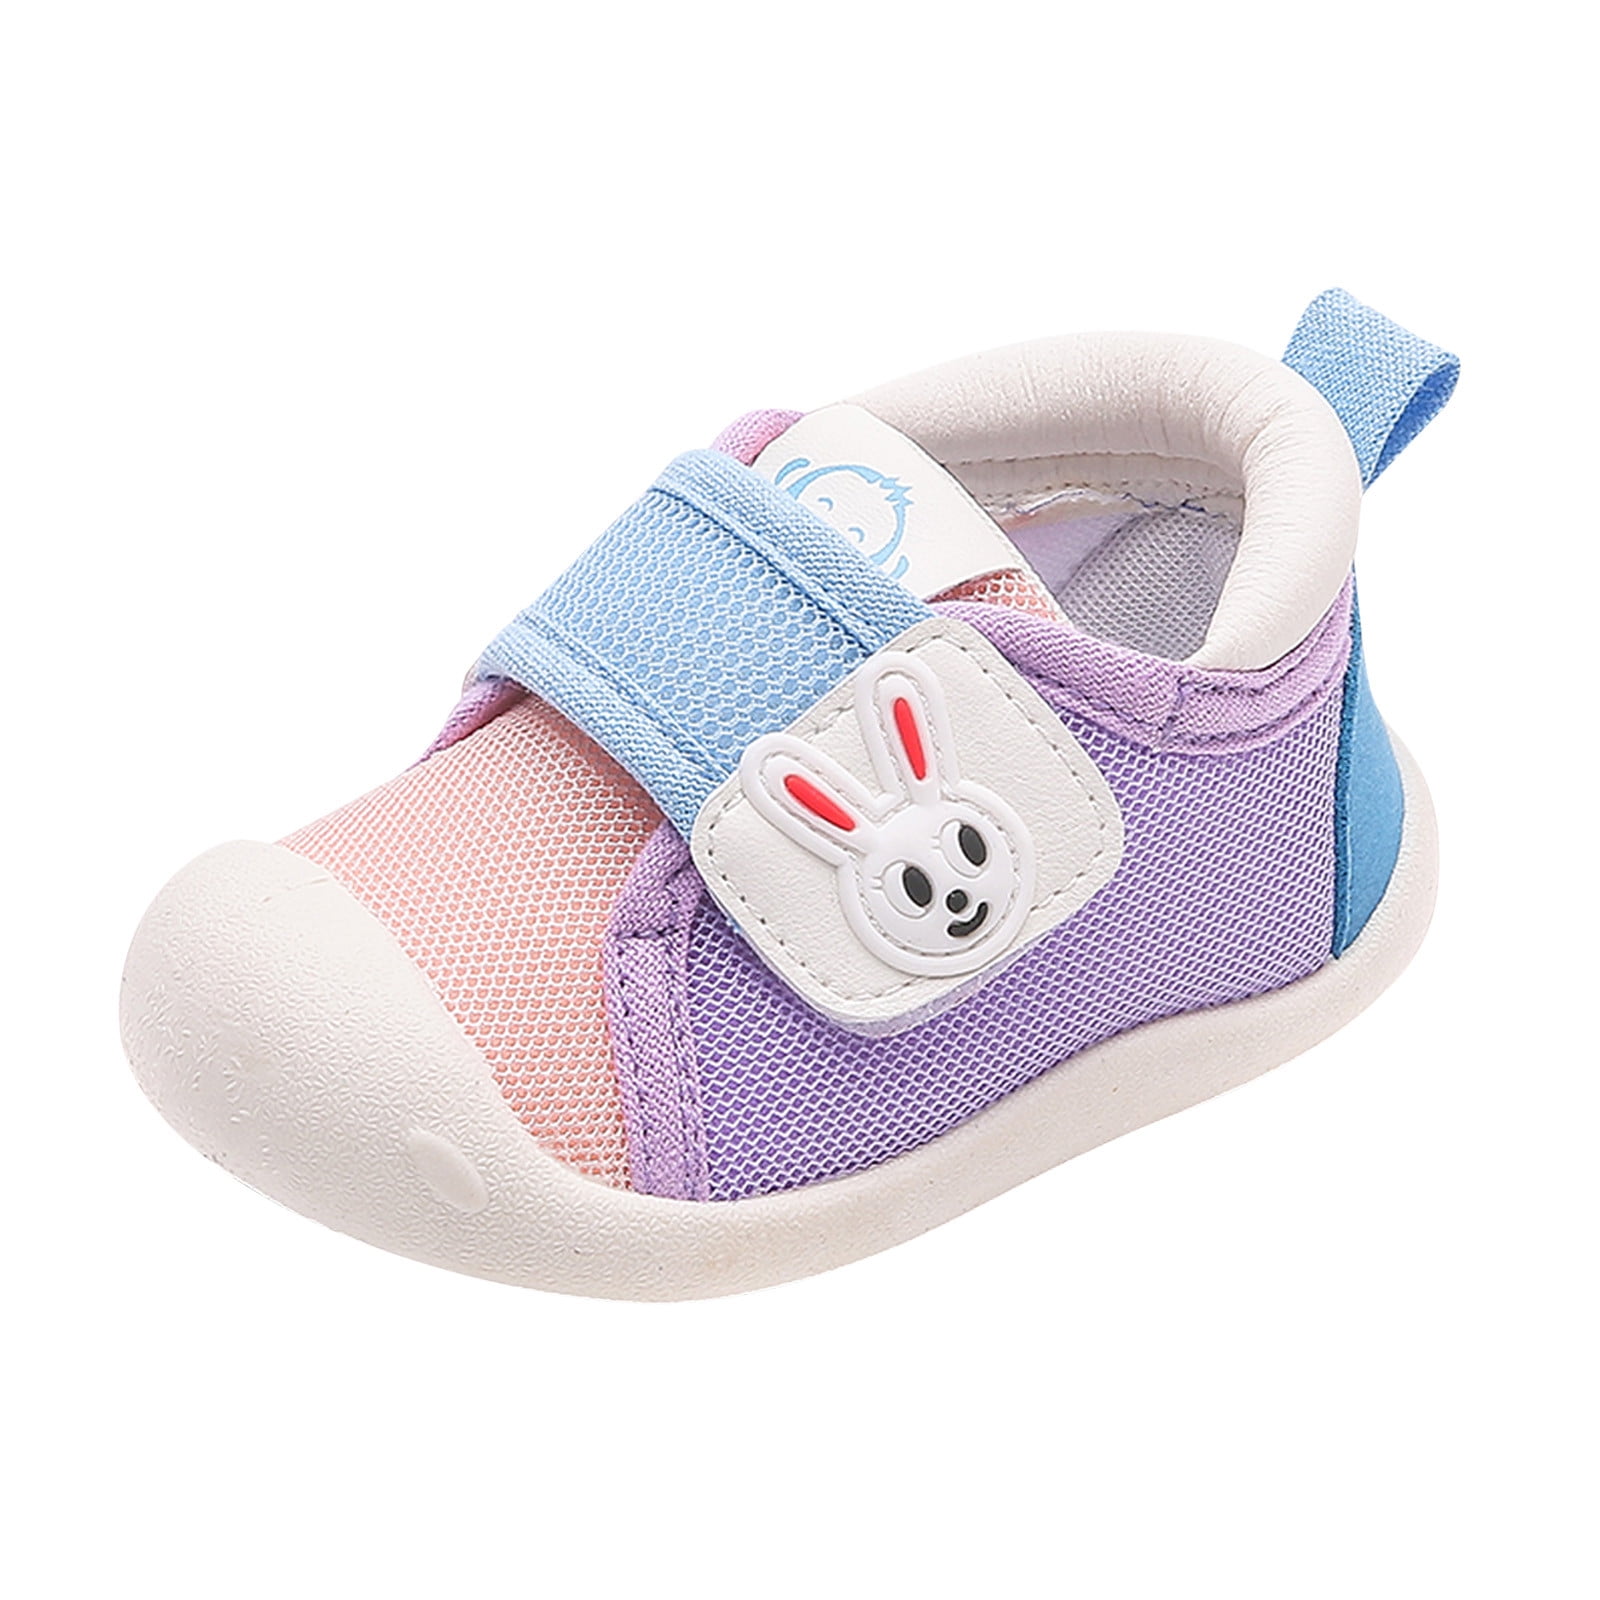 Kuner Baby Girls Boys Cotton Breathable Rubber Sole Non-Slip Sneakers First Walkers Shoes 